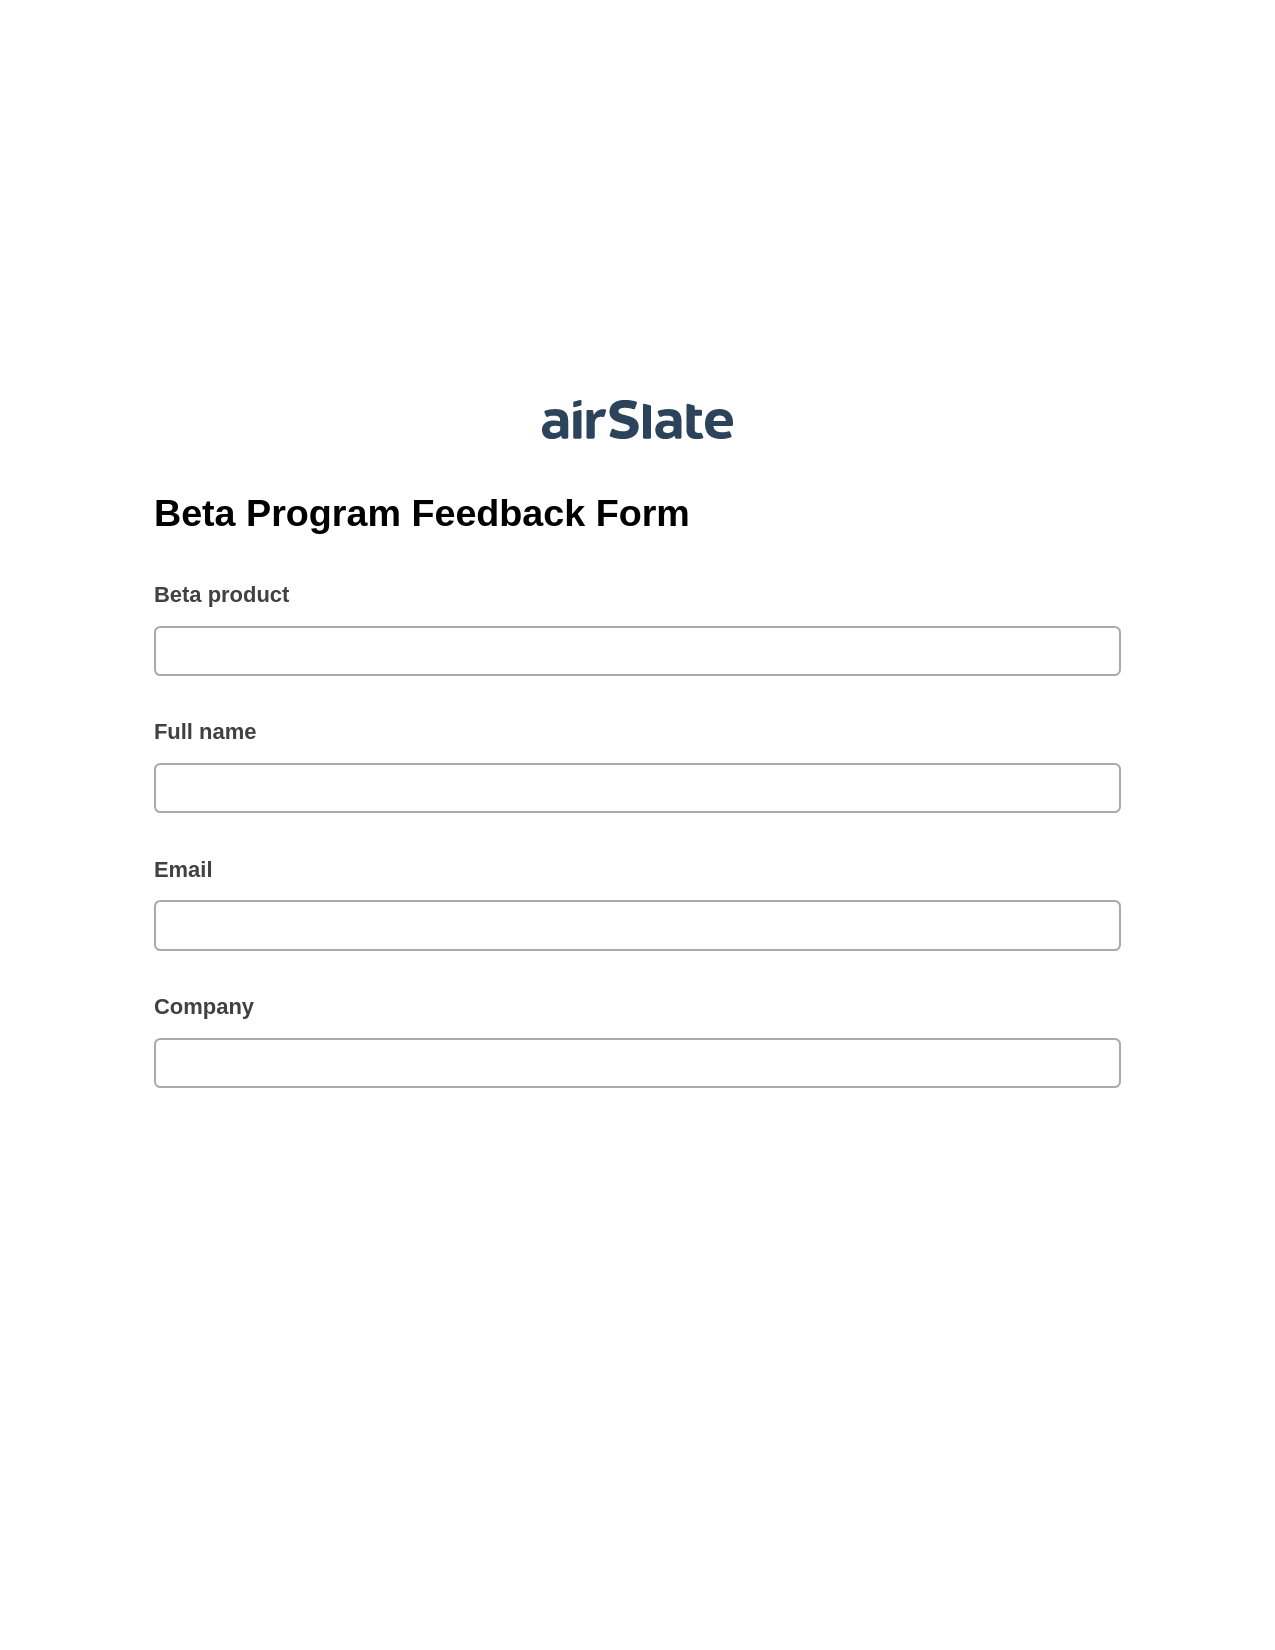 Multirole Beta Program Feedback Form Pre-fill Dropdown from Airtable, Webhook Bot, Archive to SharePoint Folder Bot